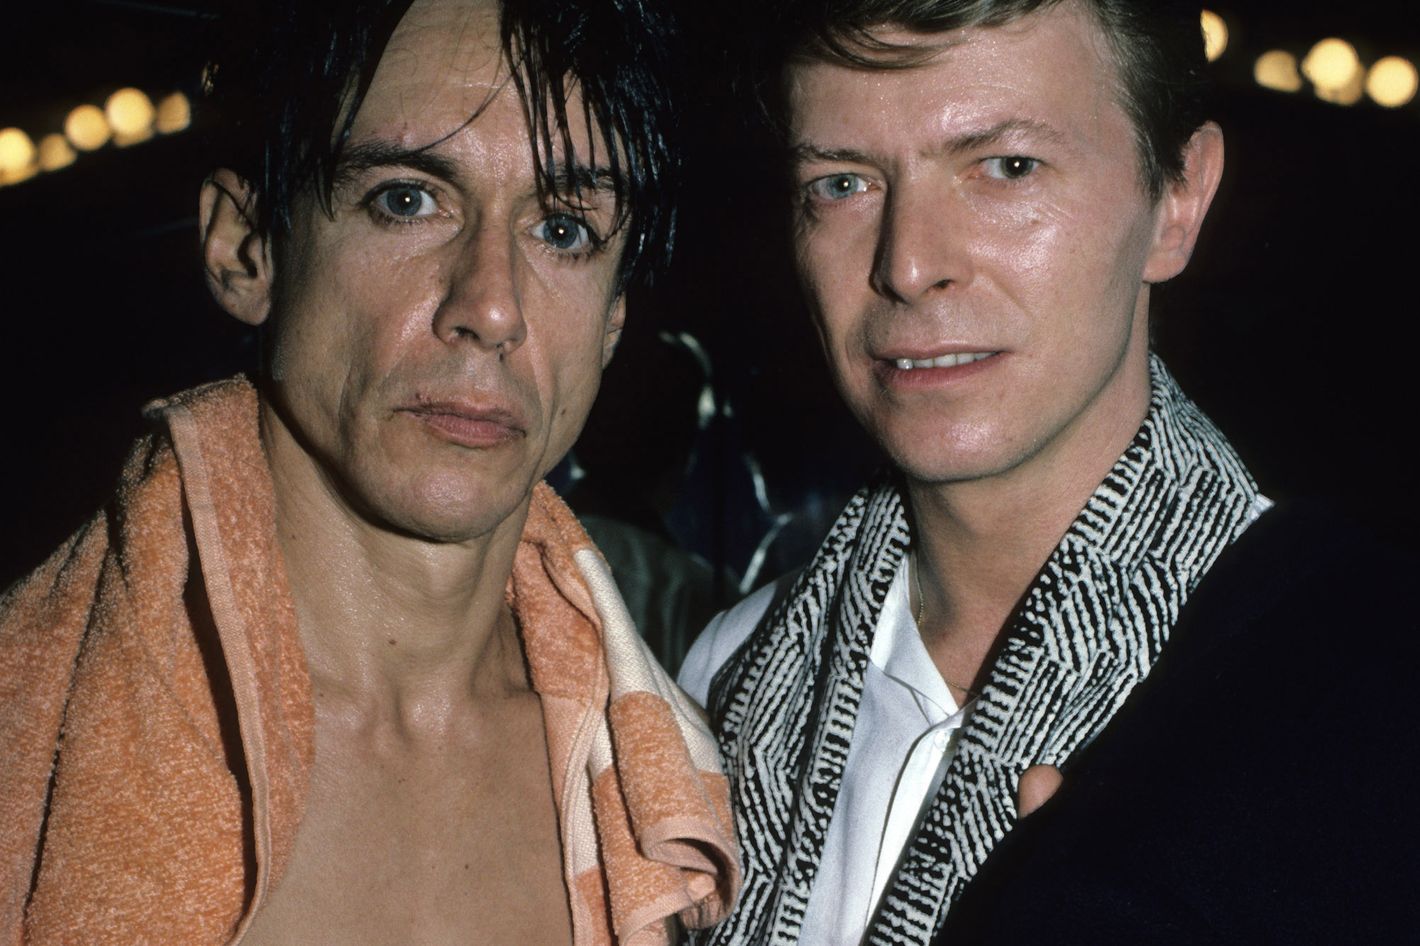 Overholdelse af Rasende bønner Iggy Pop Honored David Bowie's Memory and Music With 2-Hour Radio Show